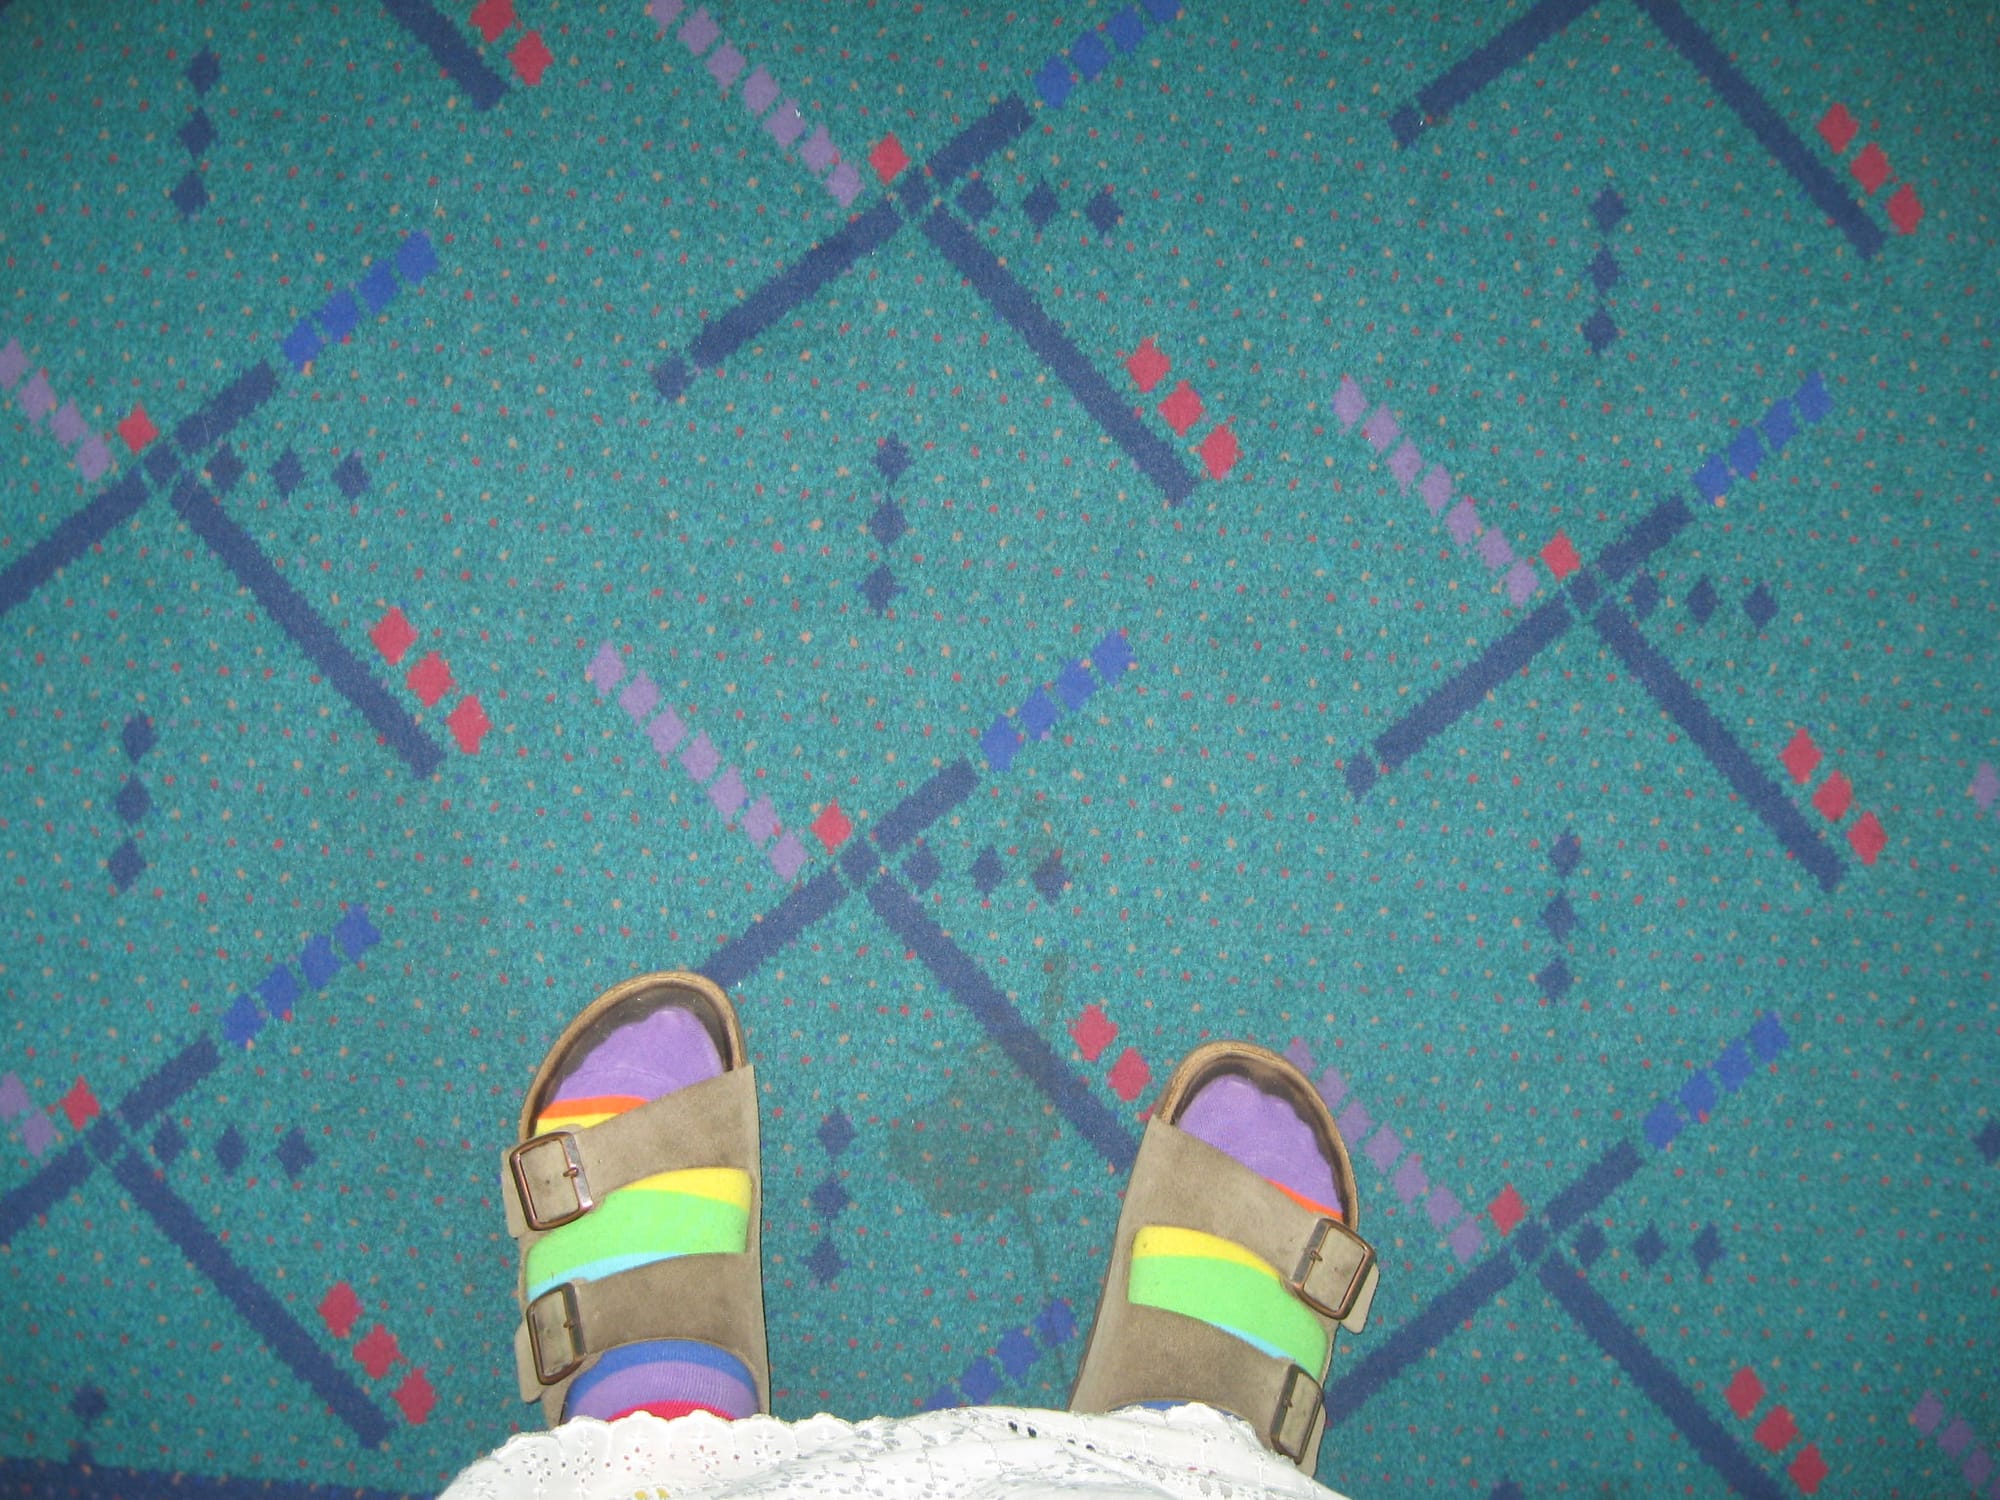 Portland International Airport Carpet: From Floor Covering to Pop Culture Phenomenon